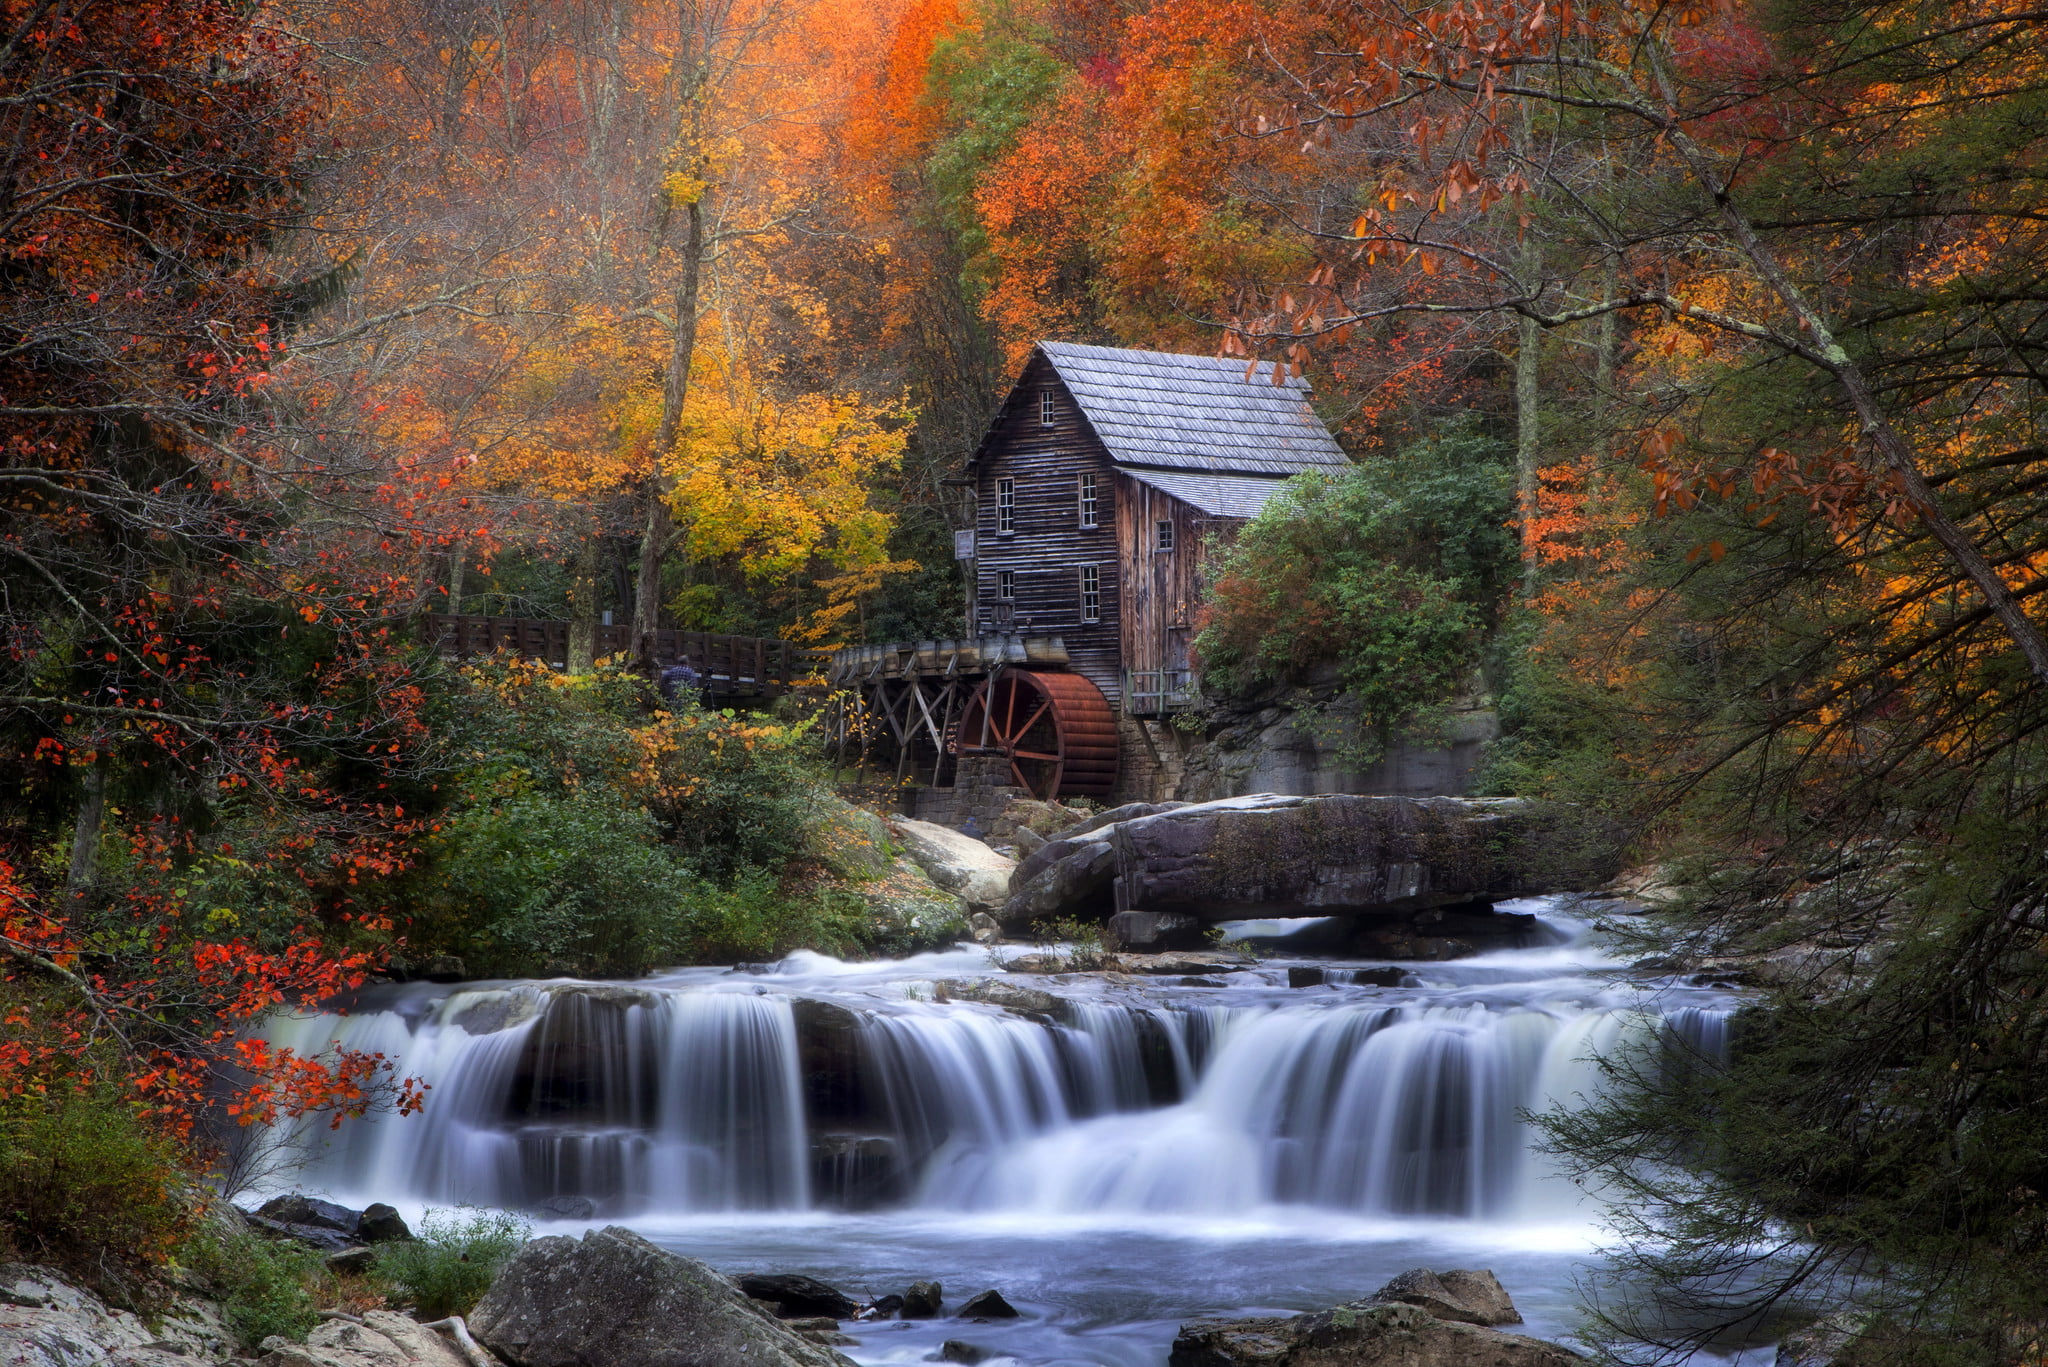 waterfalls near brown shed, autumn, forest, house, river, stones